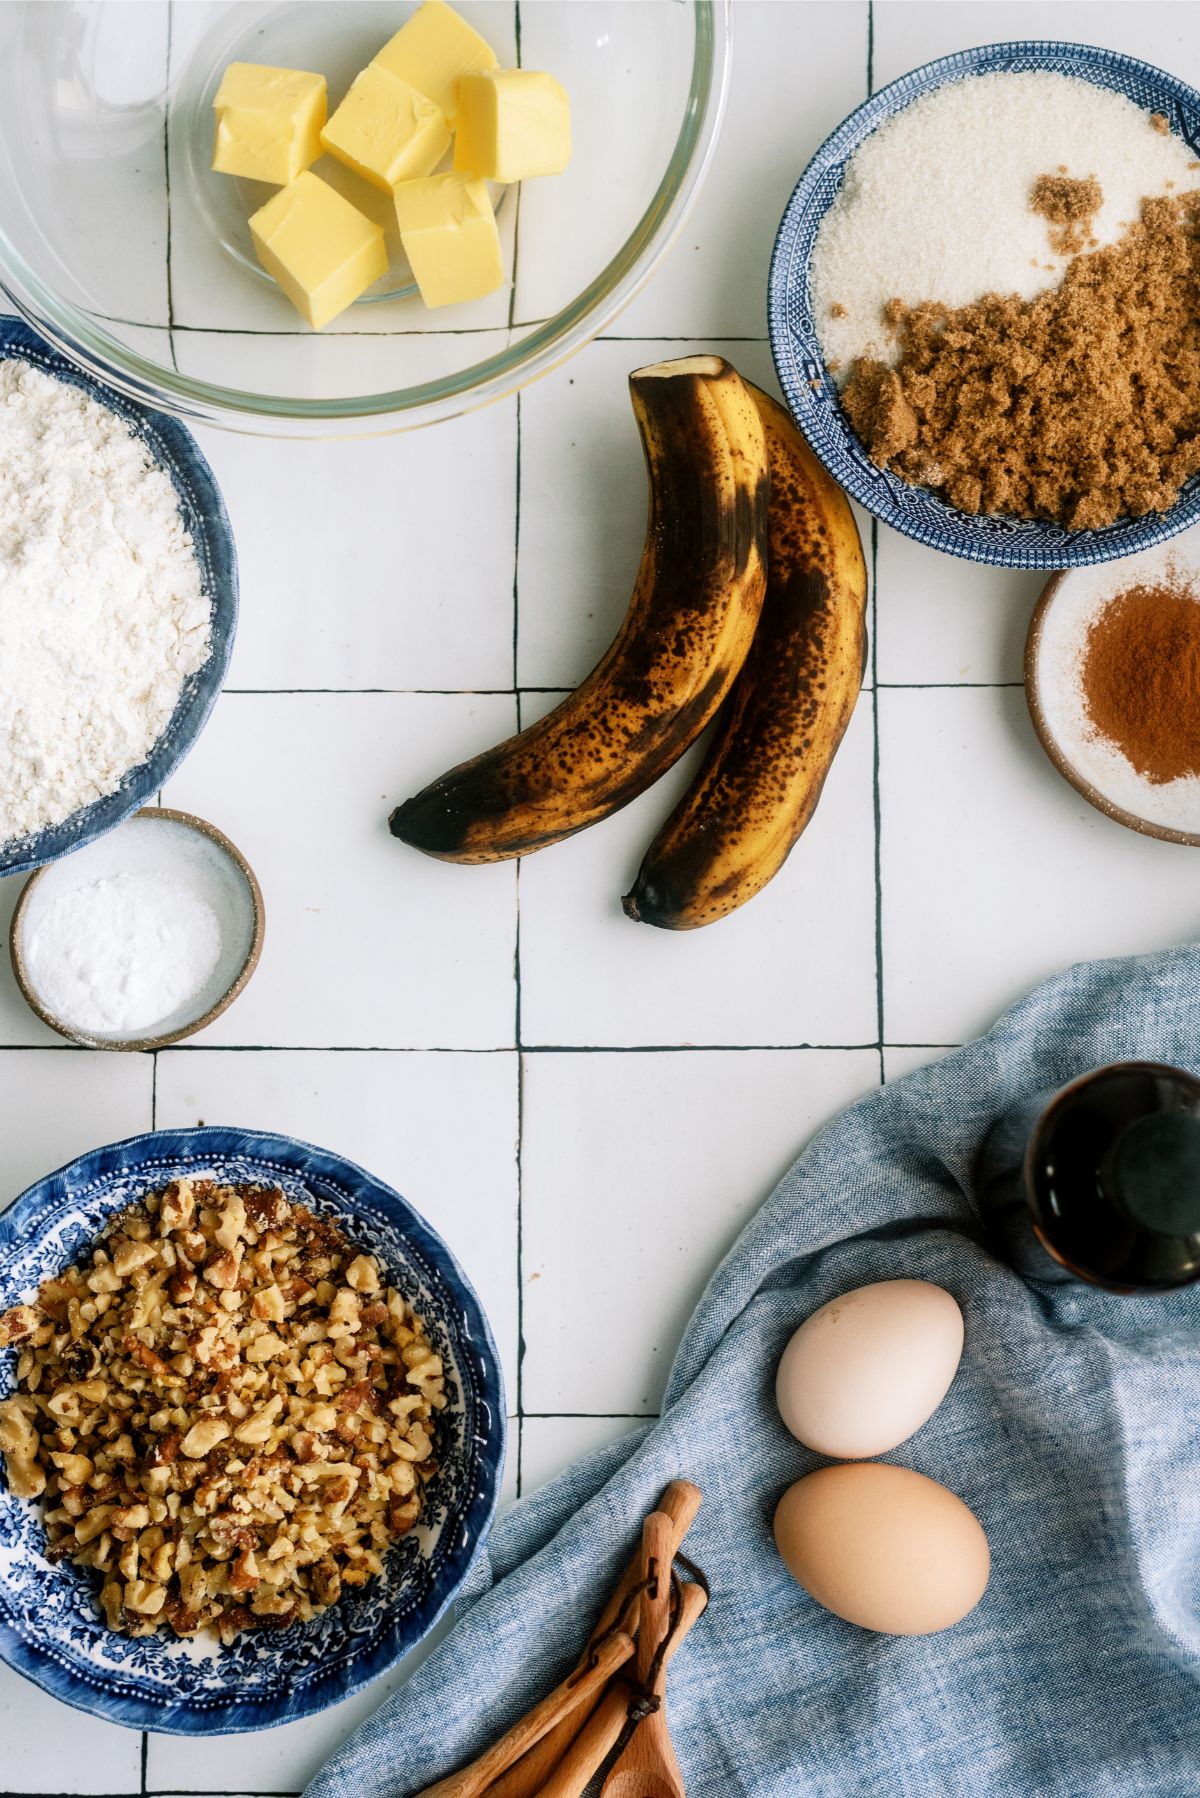 Ingredients needed to make Banana Bread 